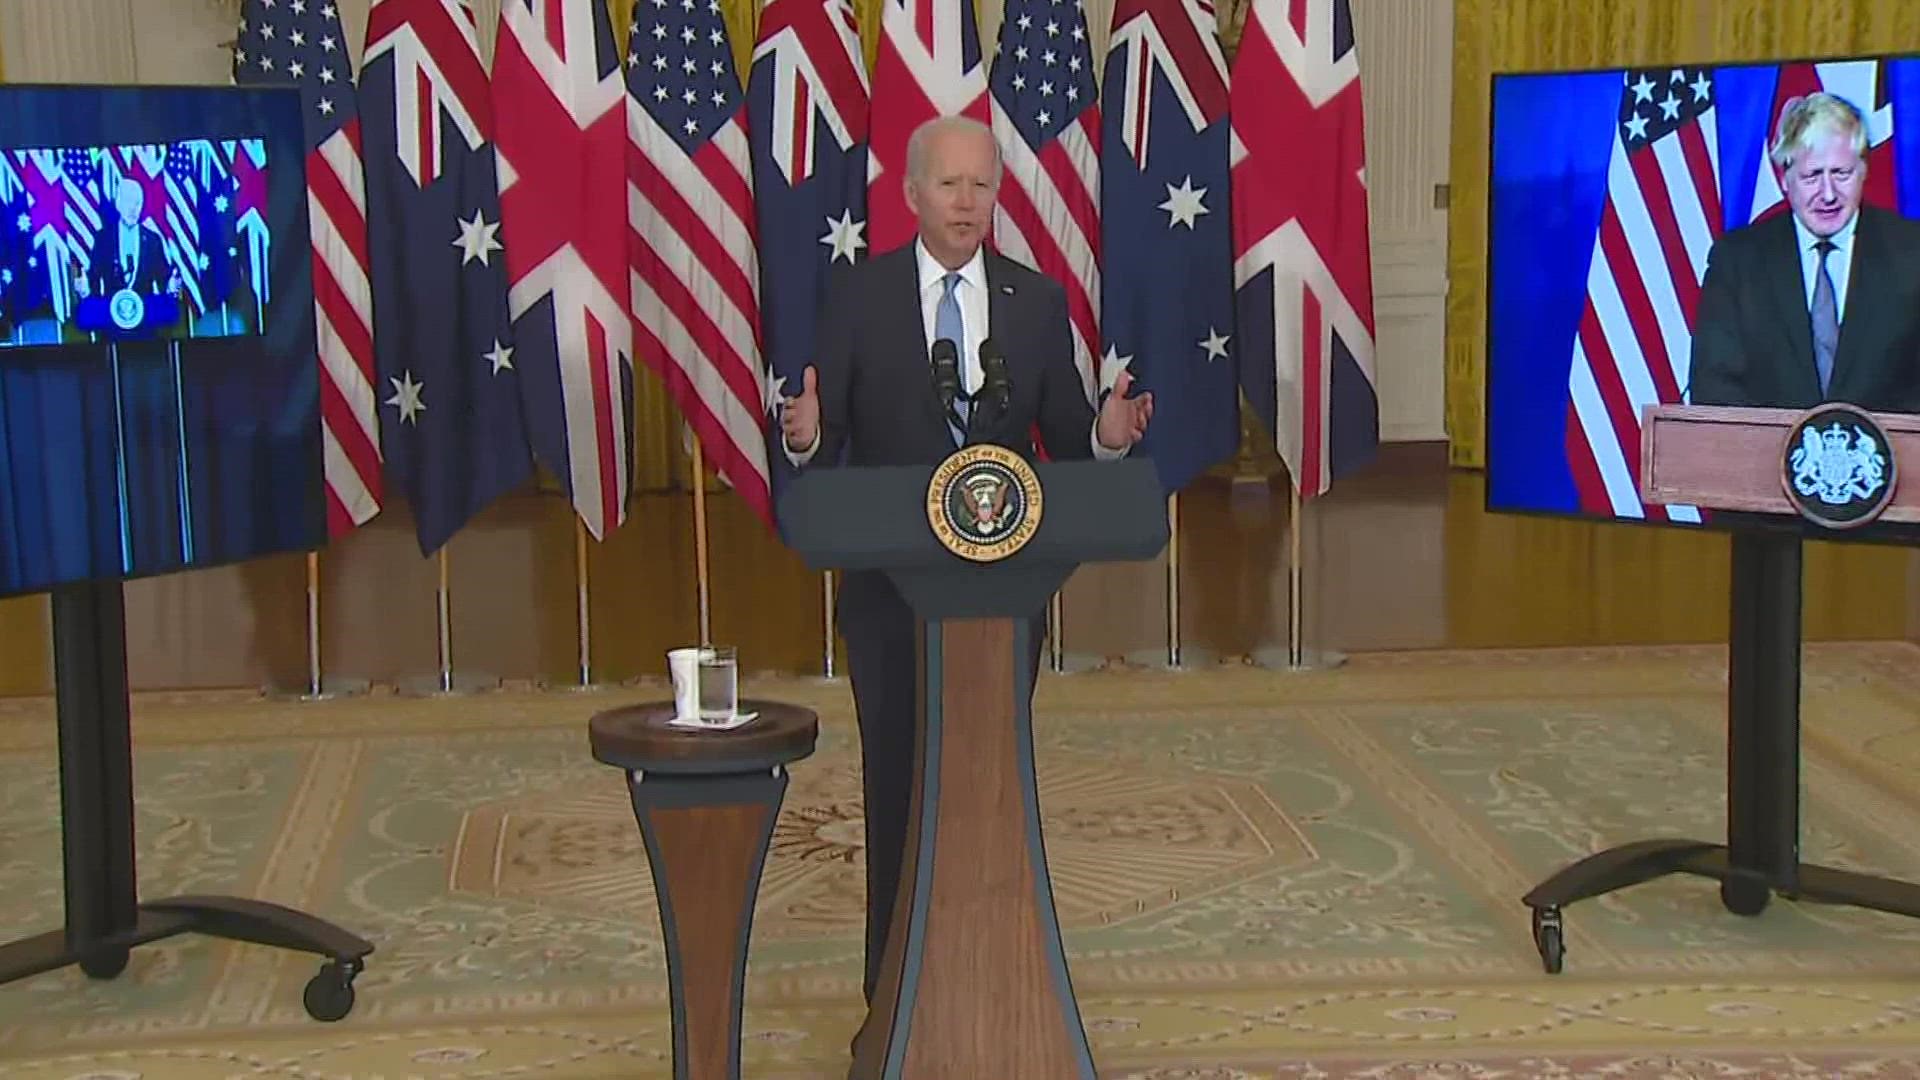 Biden was joined Wednesday by leaders of Australia and Britain to discuss security cooperation and the addition of new conventionally armed nuclear submarines.